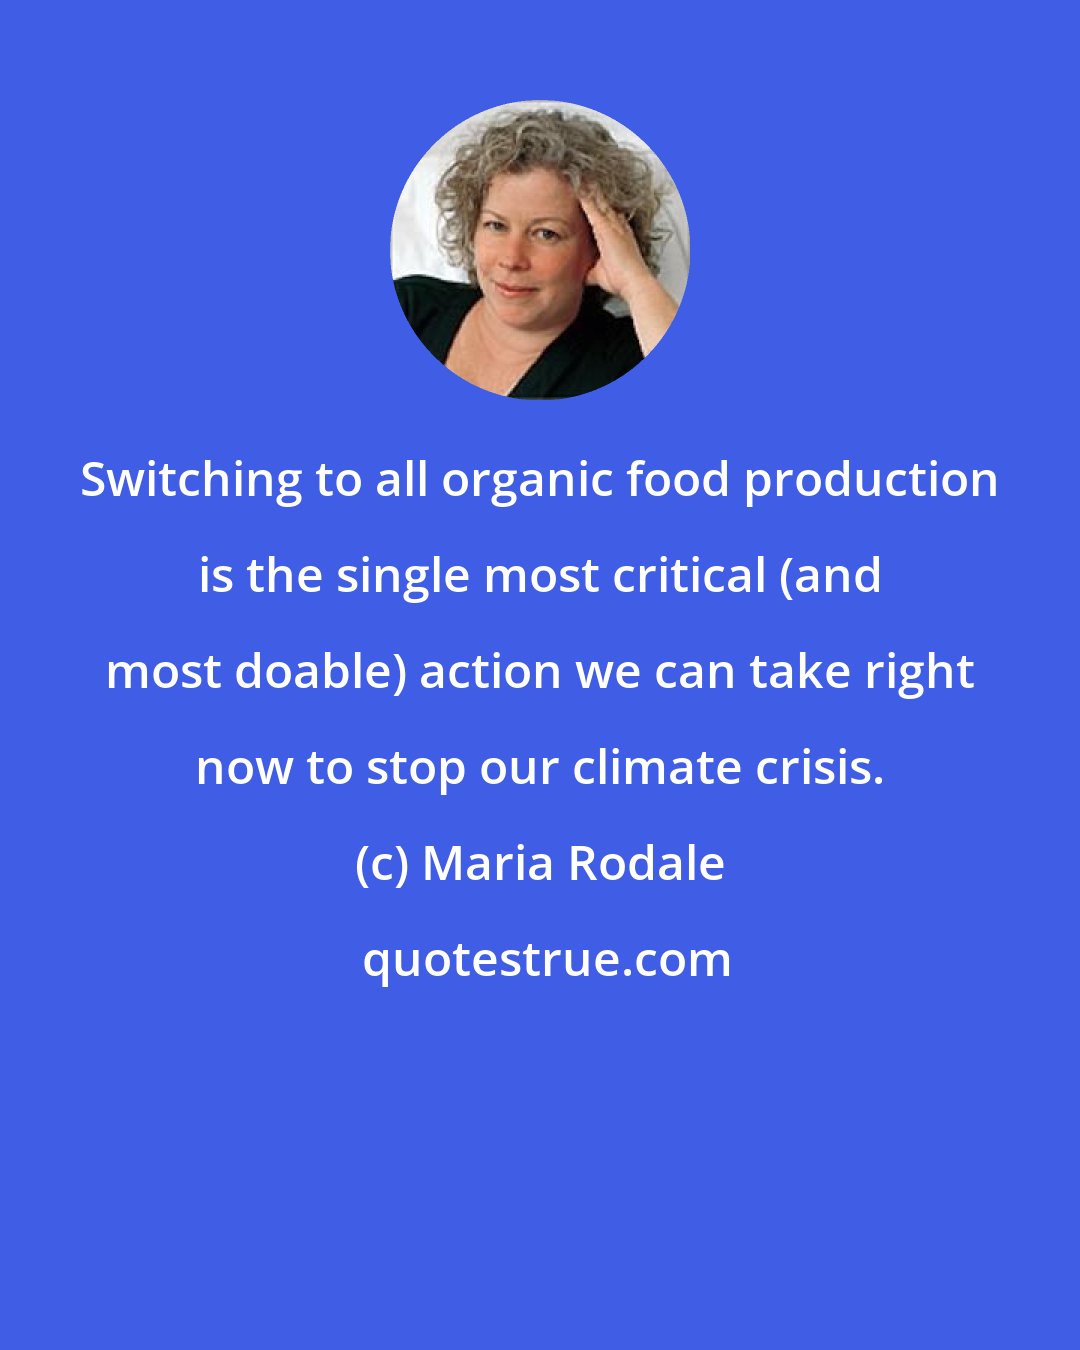 Maria Rodale: Switching to all organic food production is the single most critical (and most doable) action we can take right now to stop our climate crisis.